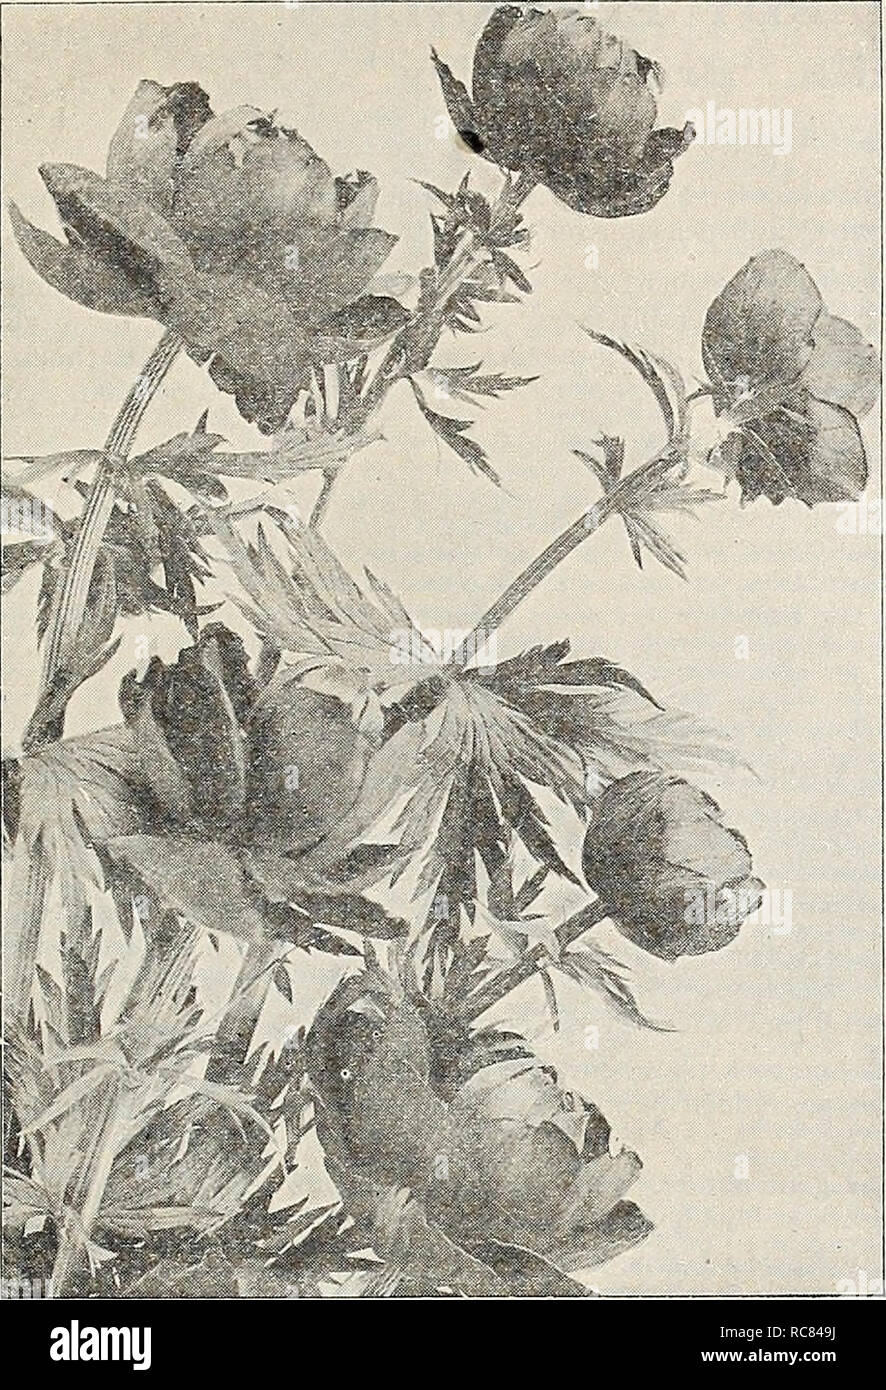 . Dreer's garden book 1932. Seeds Catalogs; Nursery stock Catalogs; Gardening Equipment and supplies Catalogs; Flowers Seeds Catalogs; Vegetables Seeds Catalogs; Fruit Seeds Catalogs. k HARDY PERENNIAL PtANTS I. ?PHIMDELPIMI 193. TrolliUS (Clobe Flower) Europaeus Hybrids. Desirable free flowering hybrids producing their giant buttercup-like blossoms ranging from pale yellow to deep orange on strong stems; May and June; 2 feet high. 35 cts. each; S3.50 per doz.; $25.00 per 100. Ledebouri. A very distinct rare species, growing 2 to 2J feet high, producing its rich orange large flowers, which ope Stock Photo